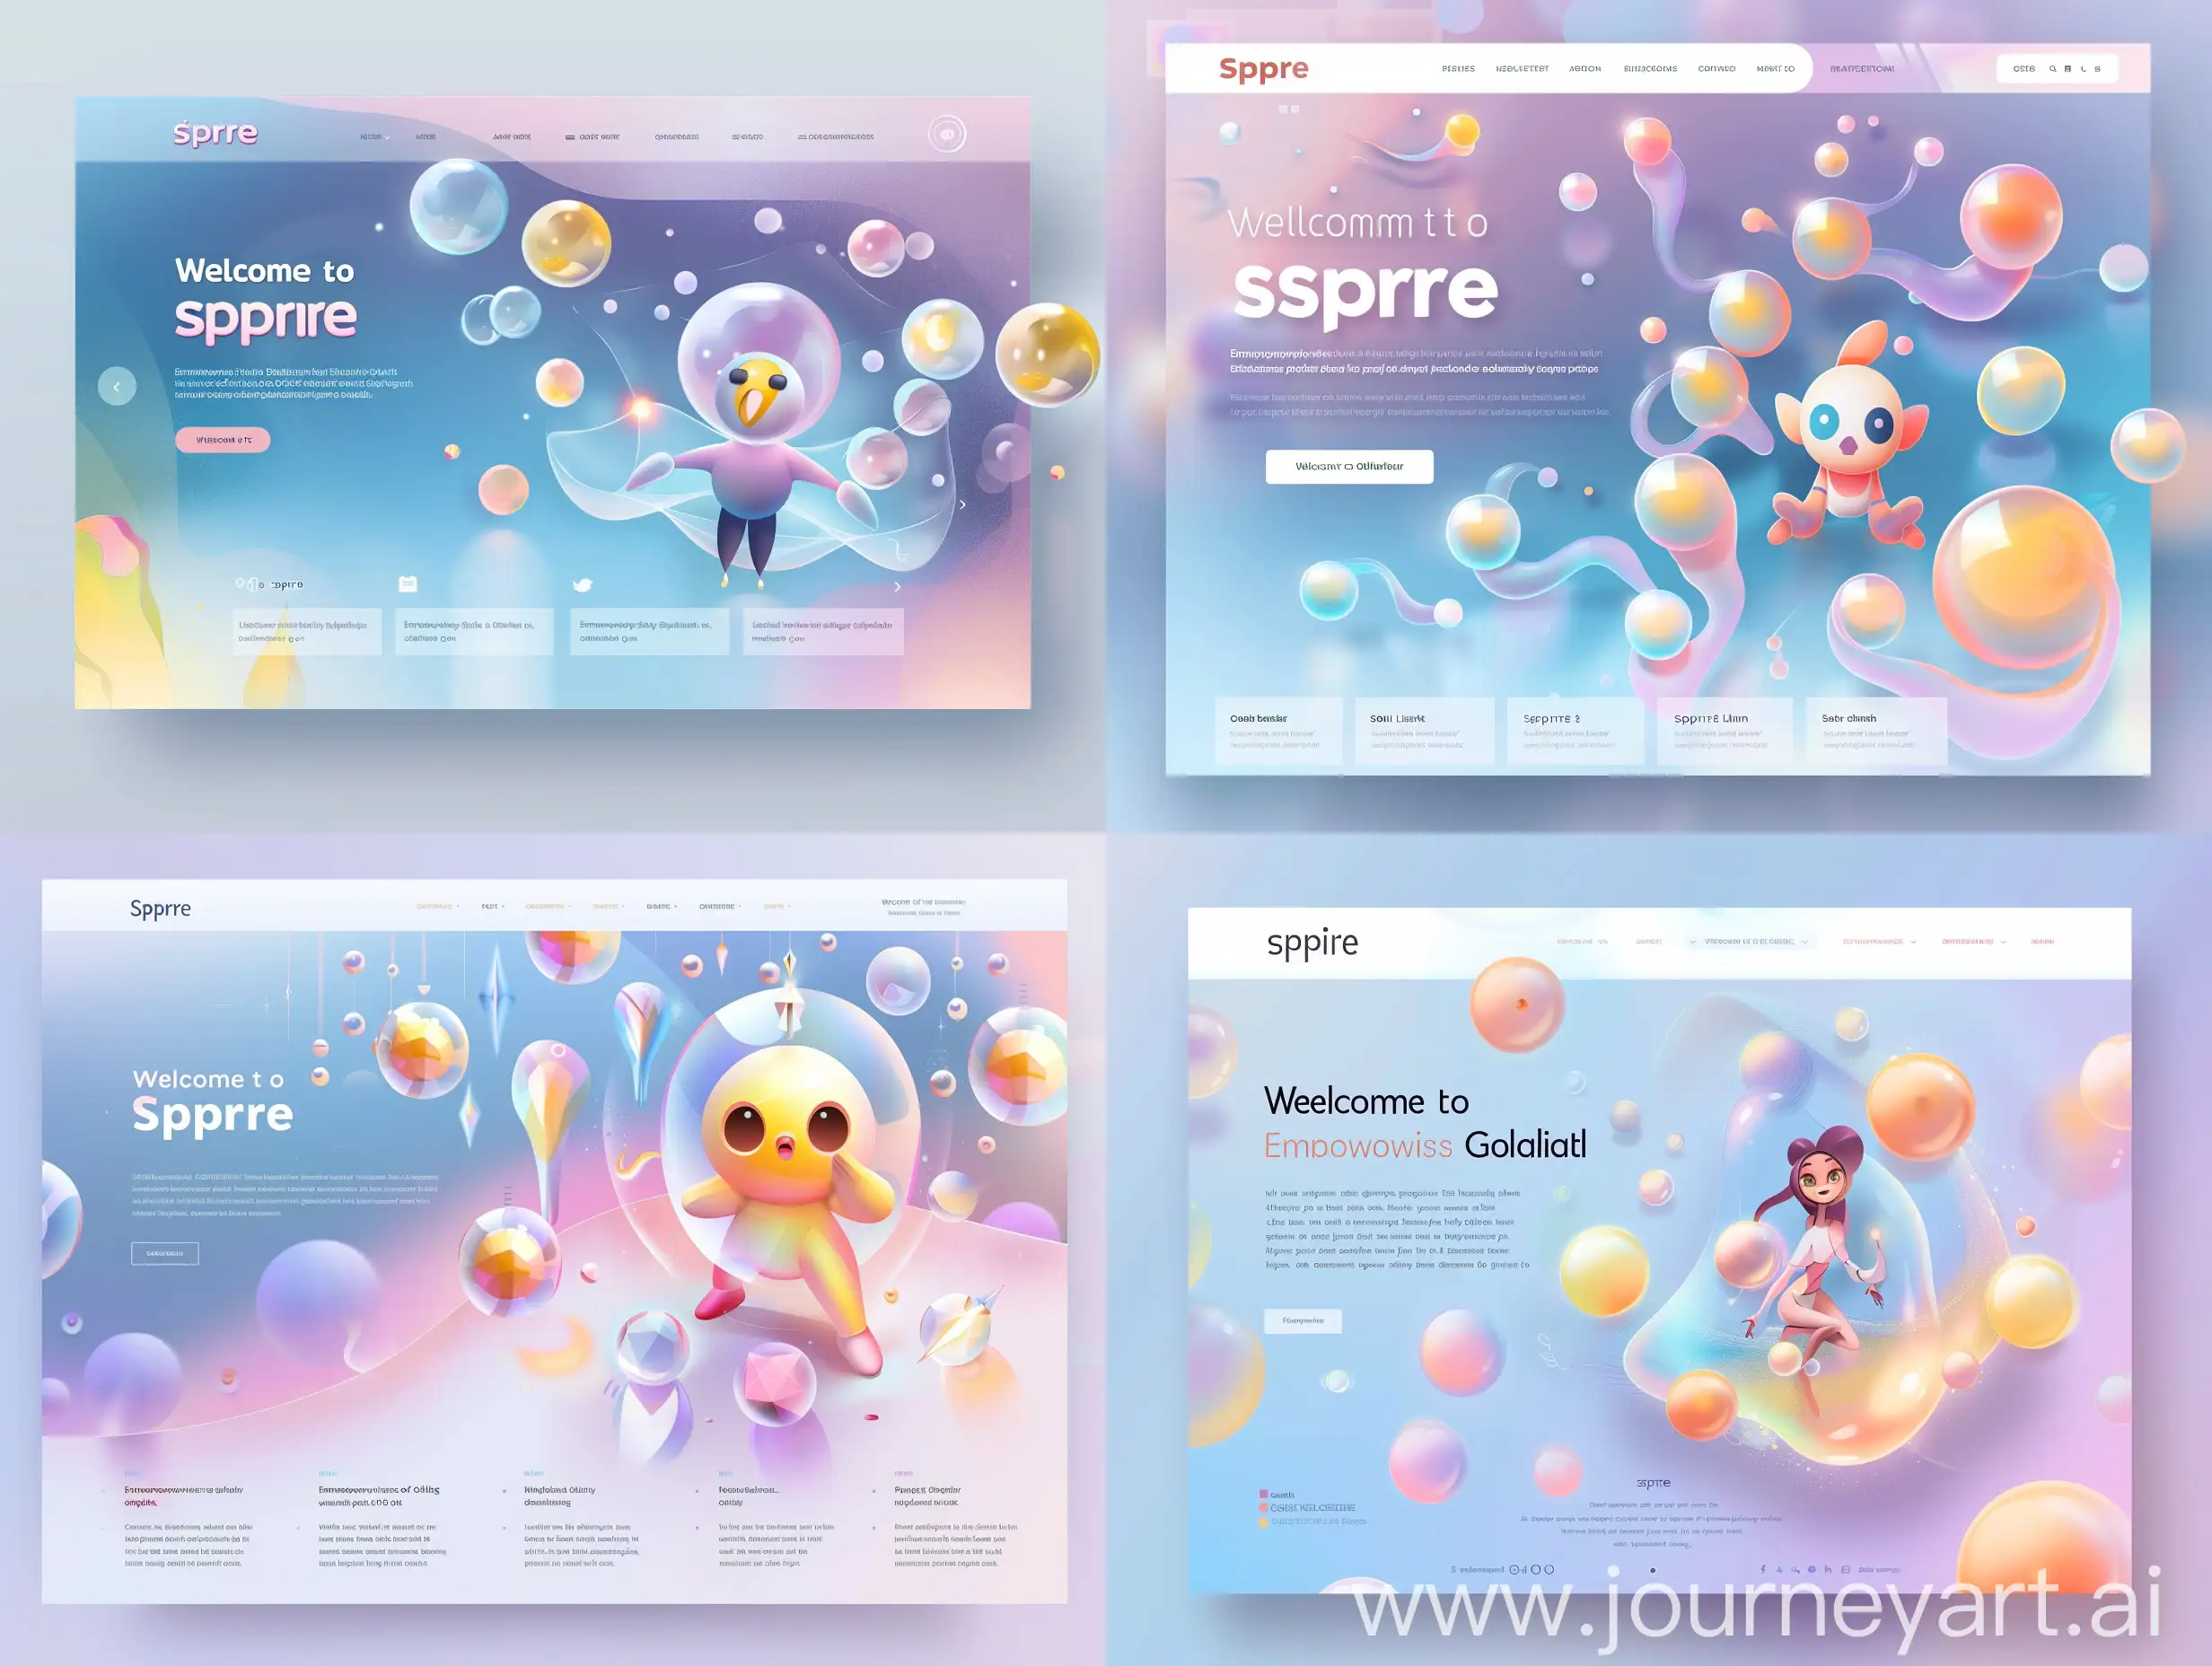 Spire-Behance-Project-Template-Welcome-to-Spire-Empowering-Industrial-Design-Students-Globally